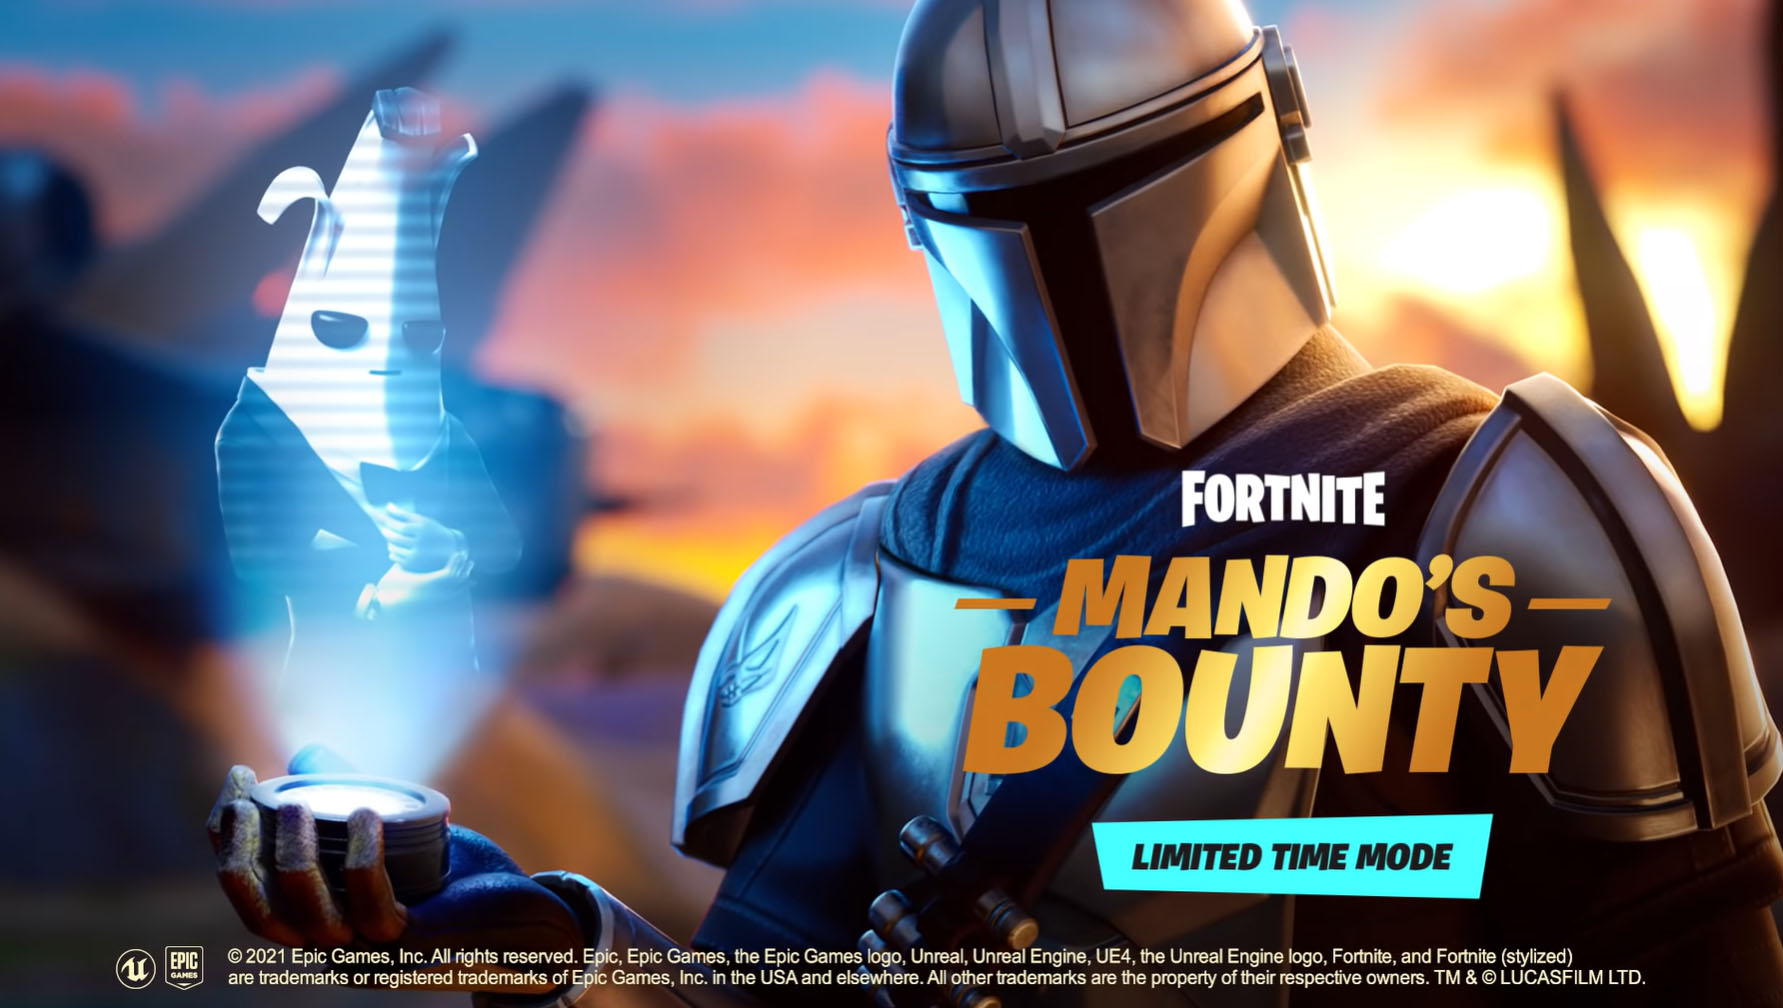 You would possibly possibly possibly out bounty-hunt the Mandalorian in Fortnite’s unusual puny-time mode simply now